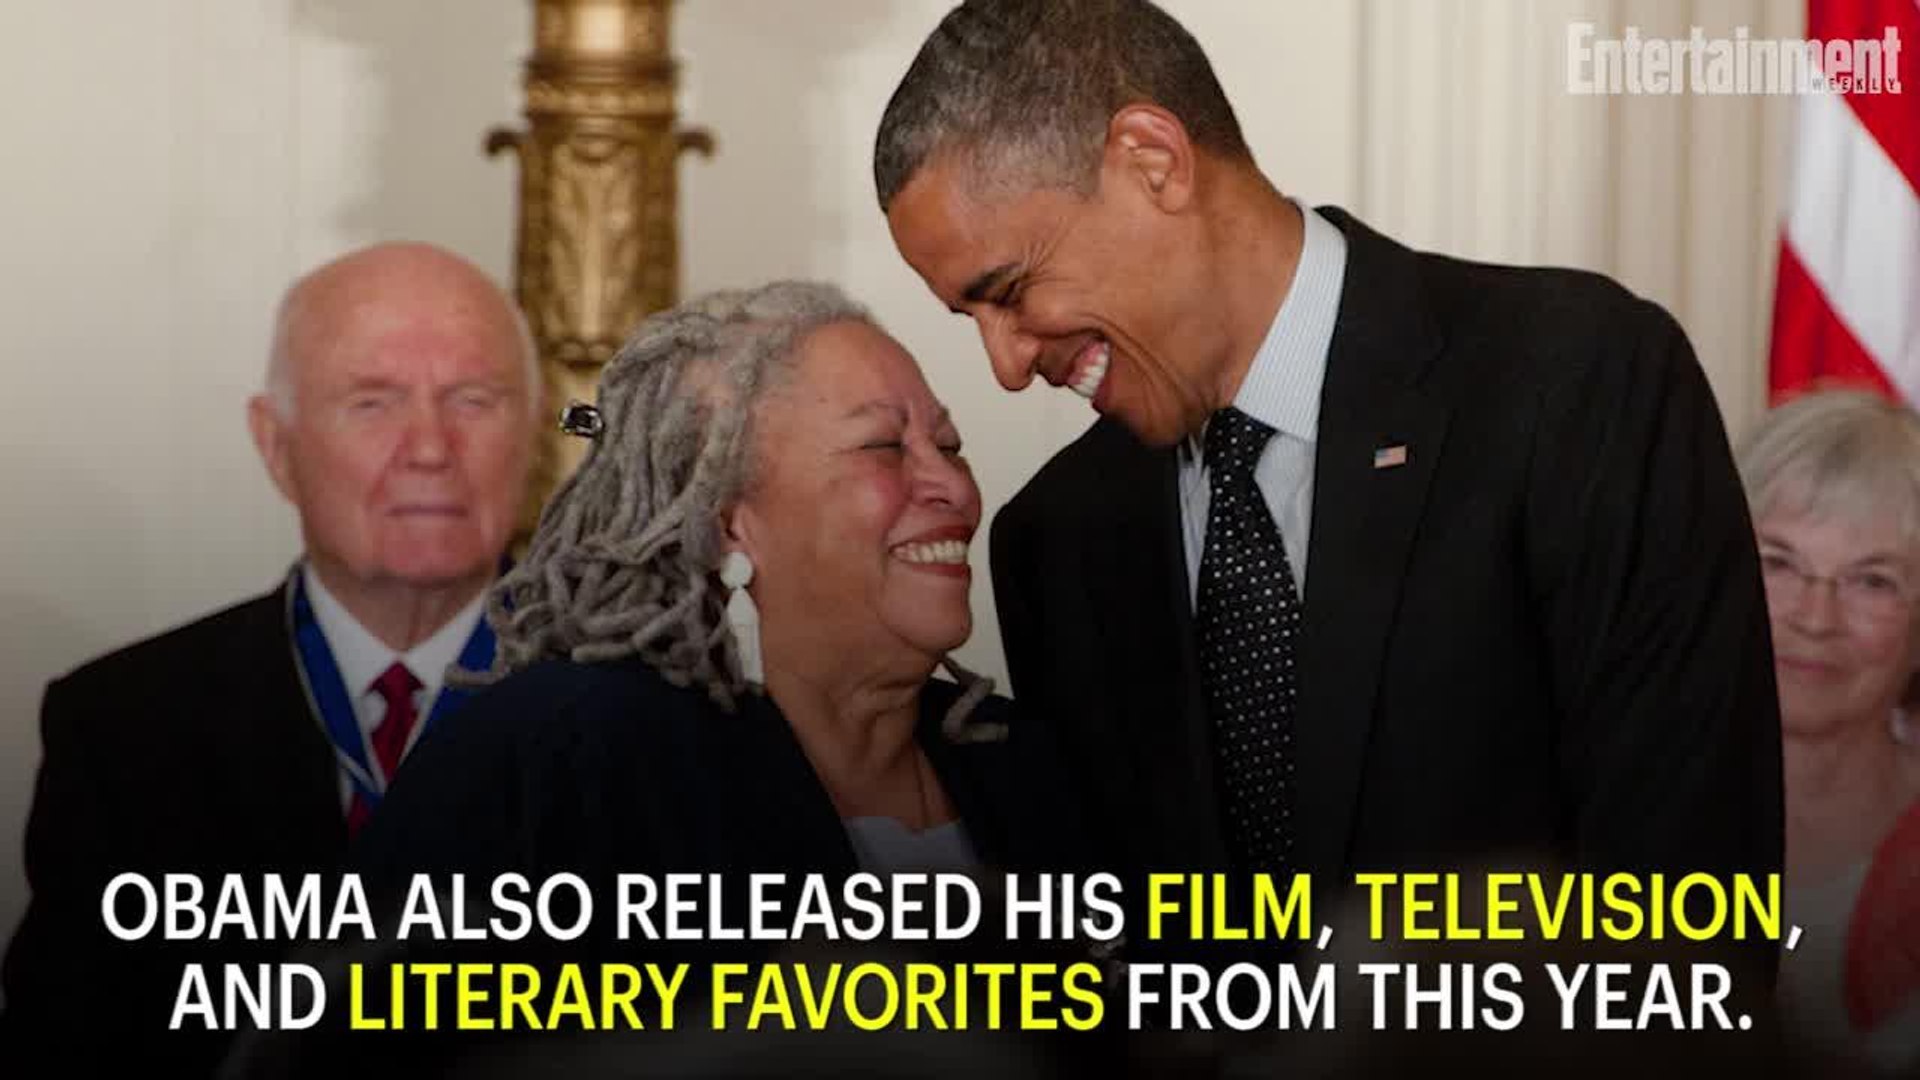 Barack Obama Dropped His List Of 2019 Favorites Including Songs, Books, Movies, And Tv Shows.